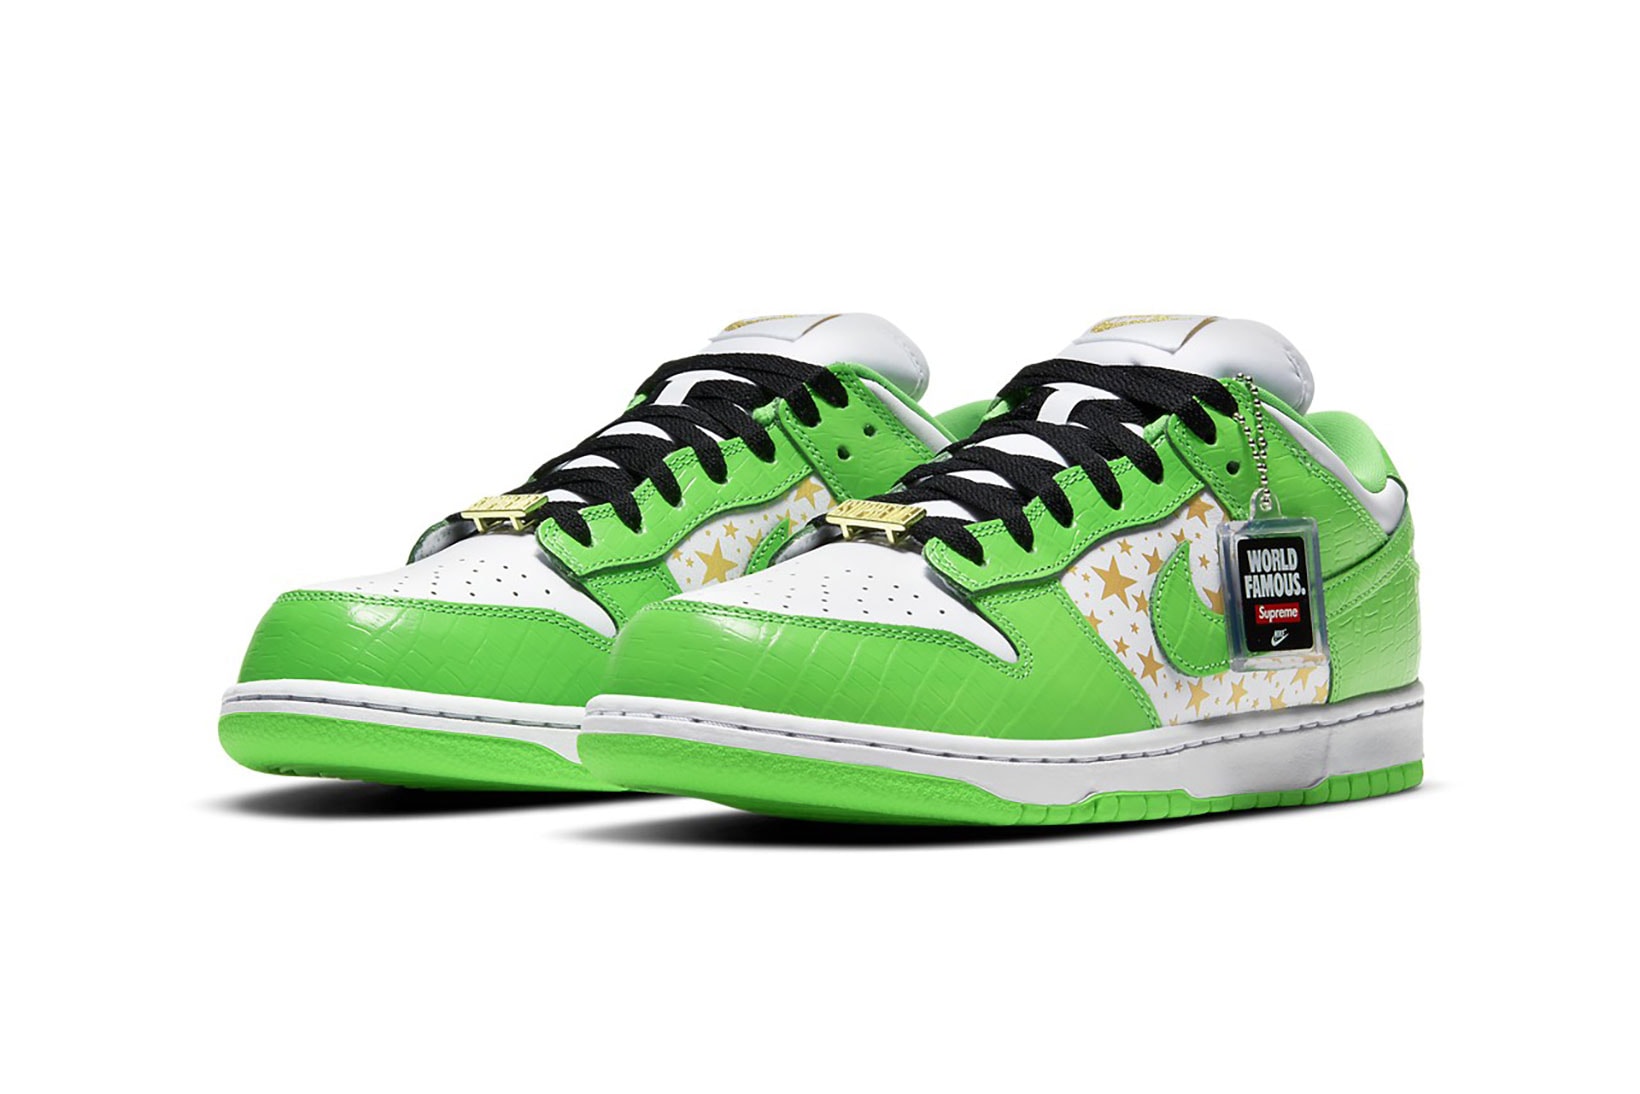 supreme nike sb dunk low collaboration sneakers mean green white black stars colorway sneakerhead shoes footwear laces tag